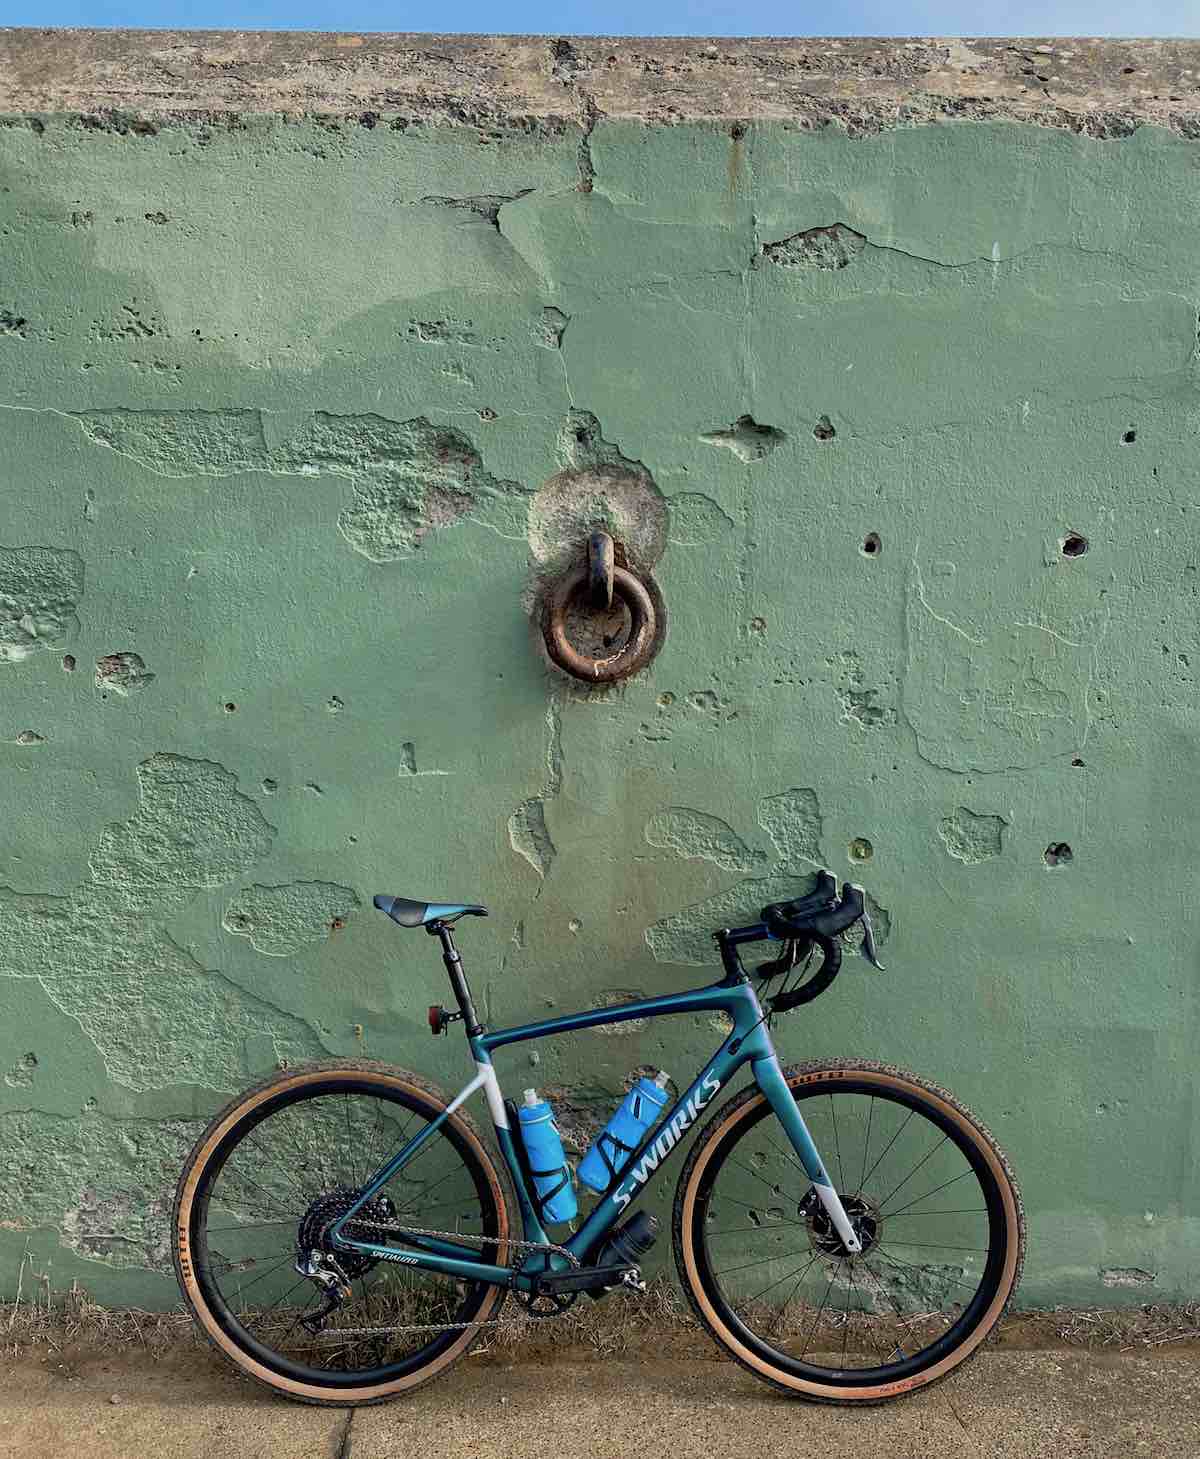 bikerumor pic of the day fort barry, battery mendell in the marin headlands, california. blue s-works bike up against a light green fortified wall with giant metal ring.